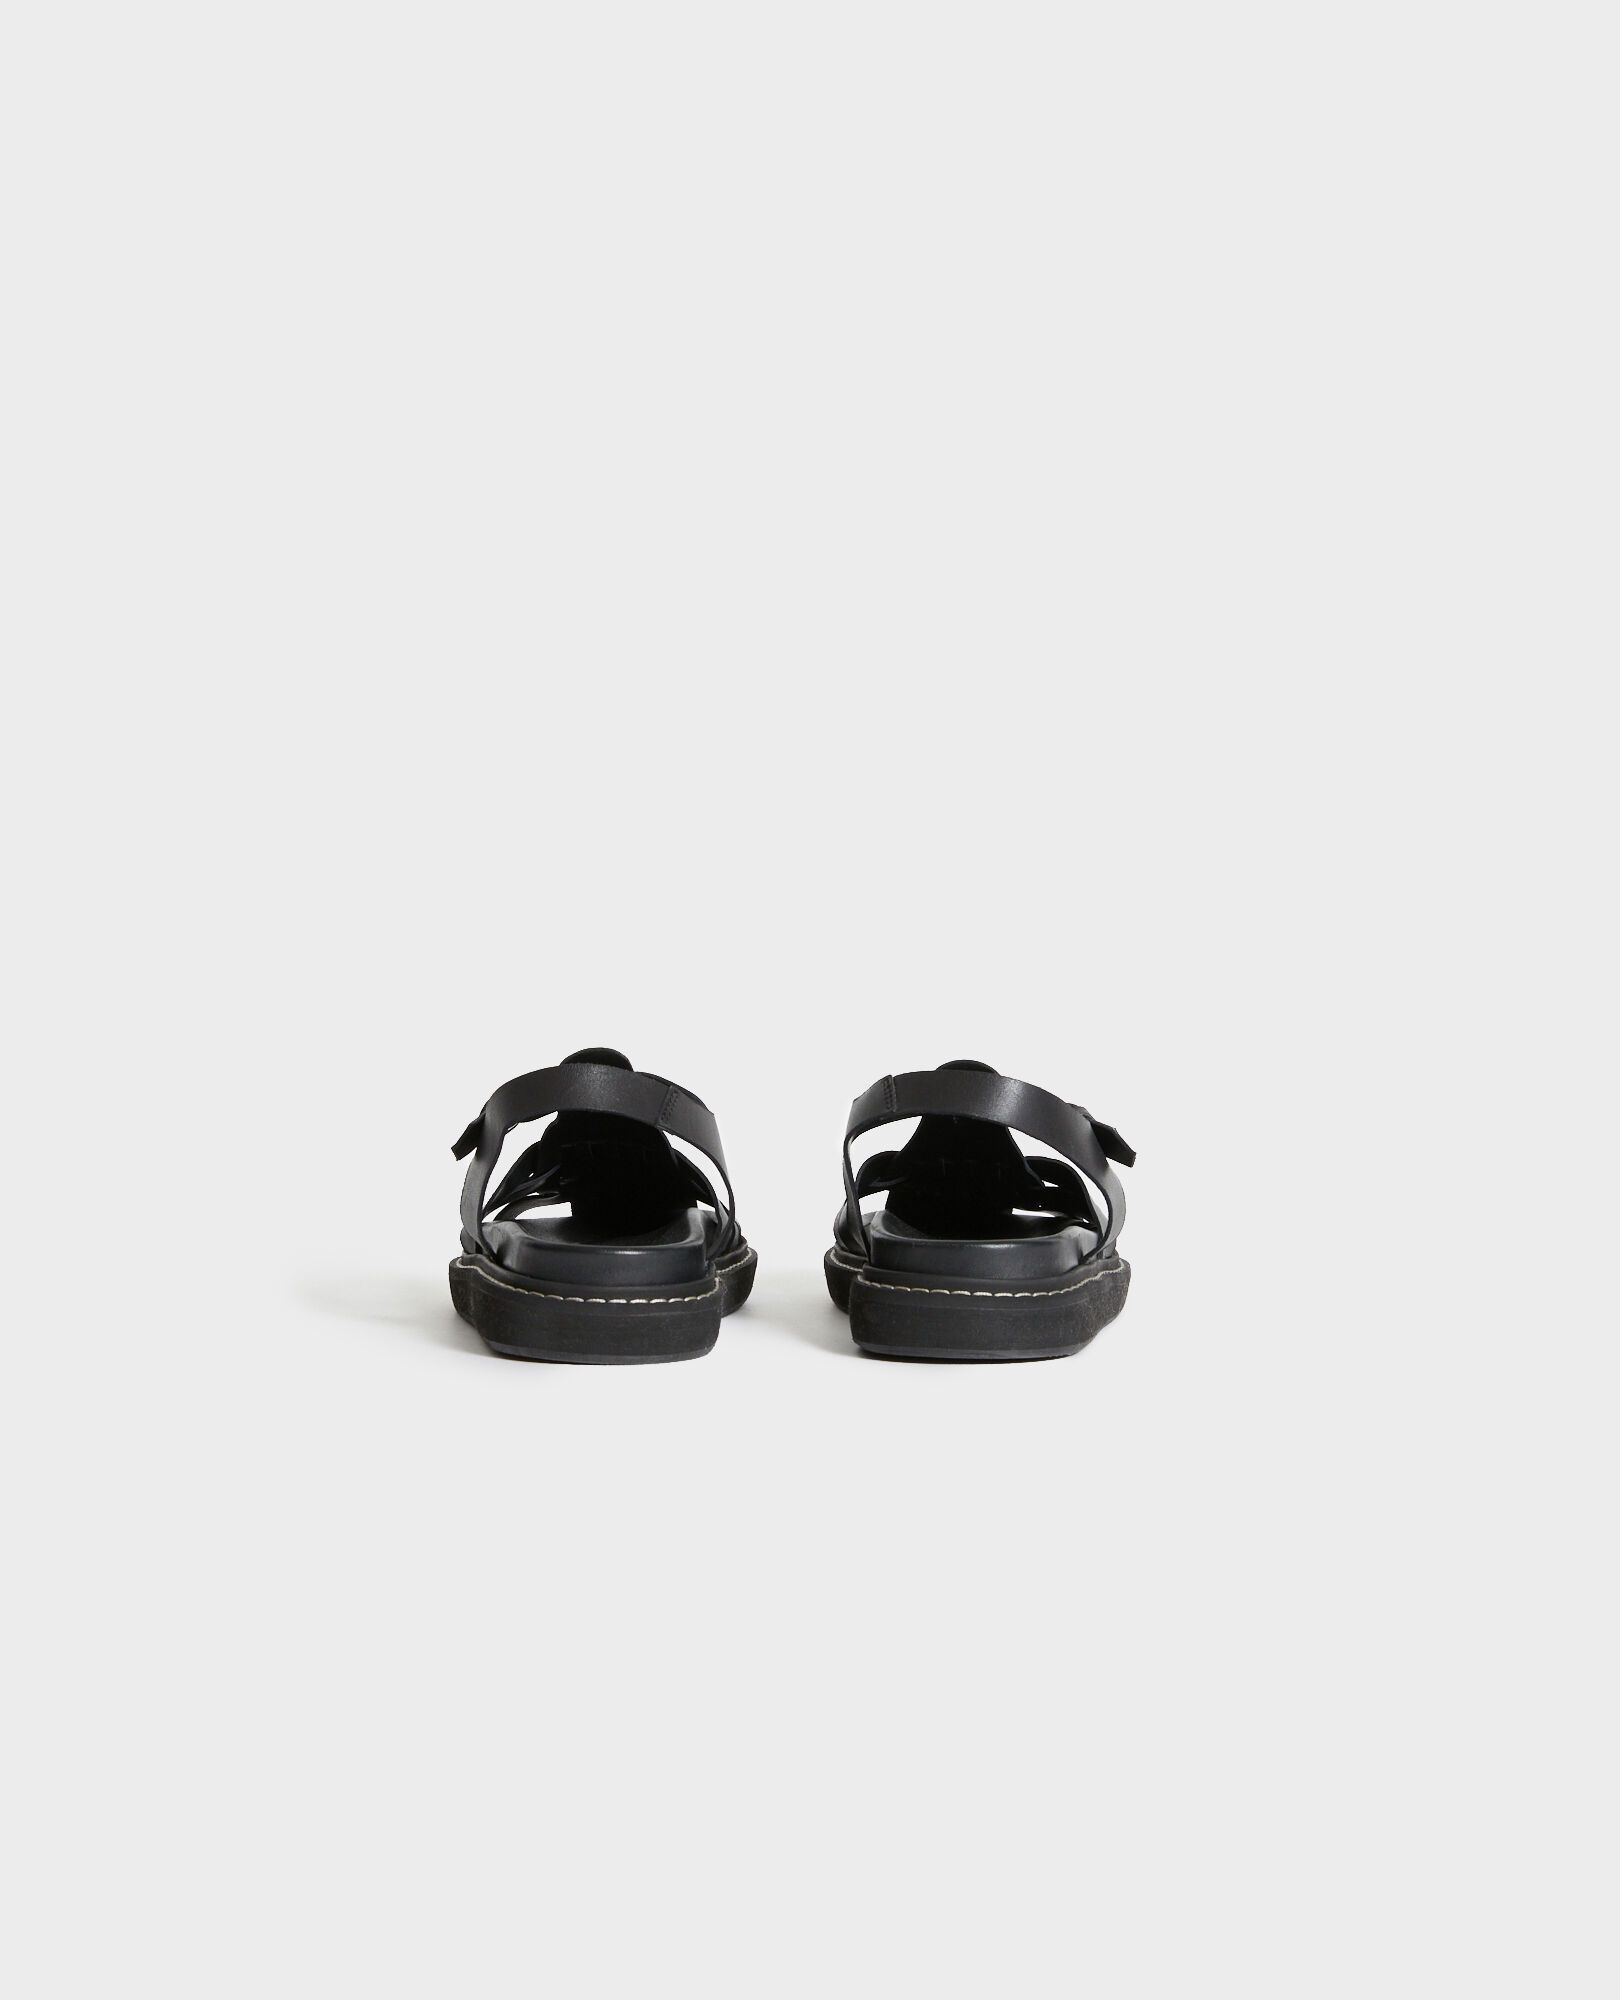 Leather sandals 09 black 2ss22442